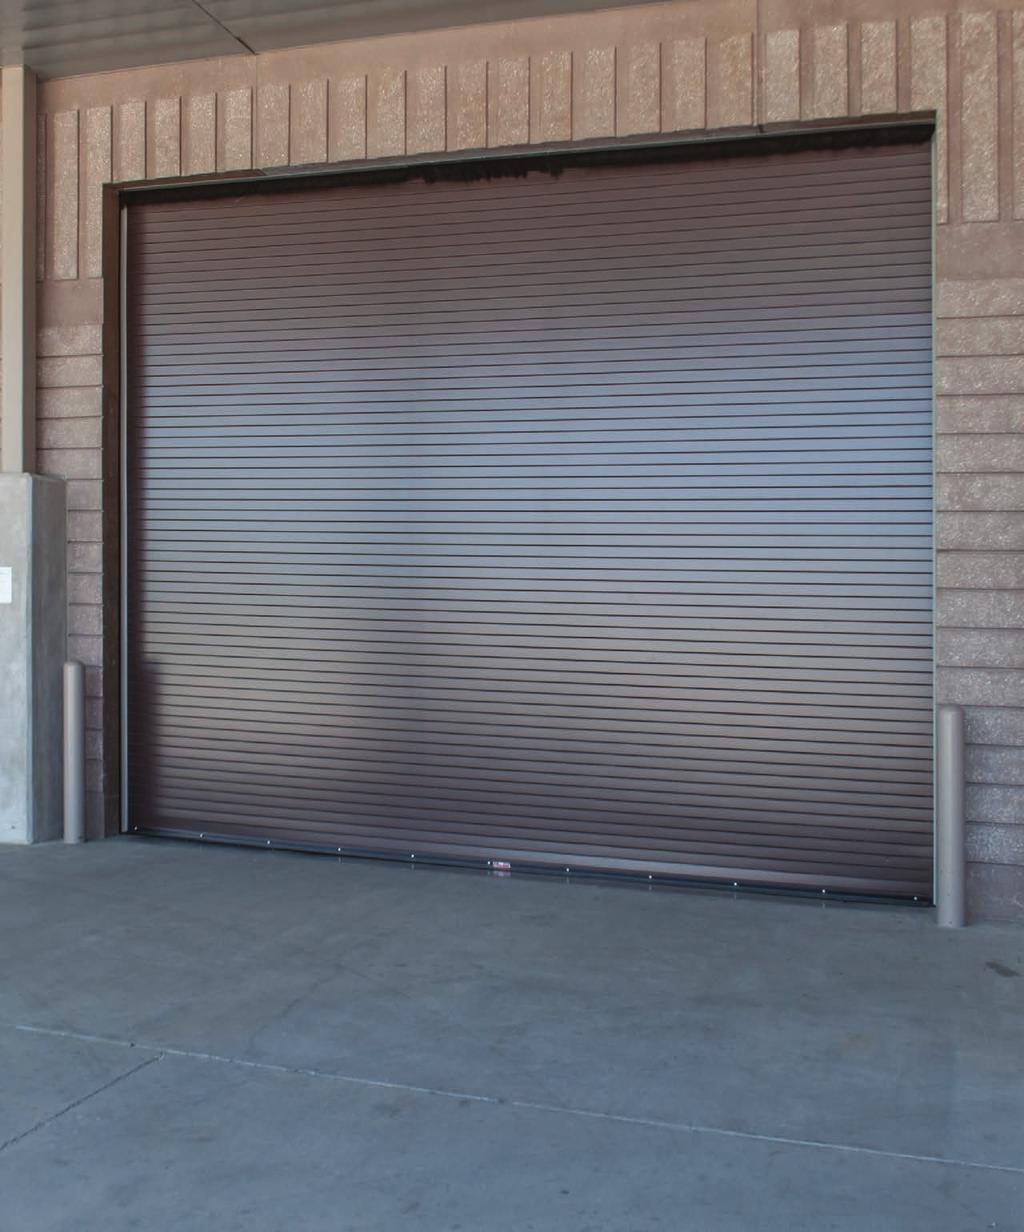 EVERSERVE MODEL 620S SPRINGLESS SERVICE DOORS EVERSERVE MODEL 620S is best suited for exterior applications that are exposed to harsh weather.